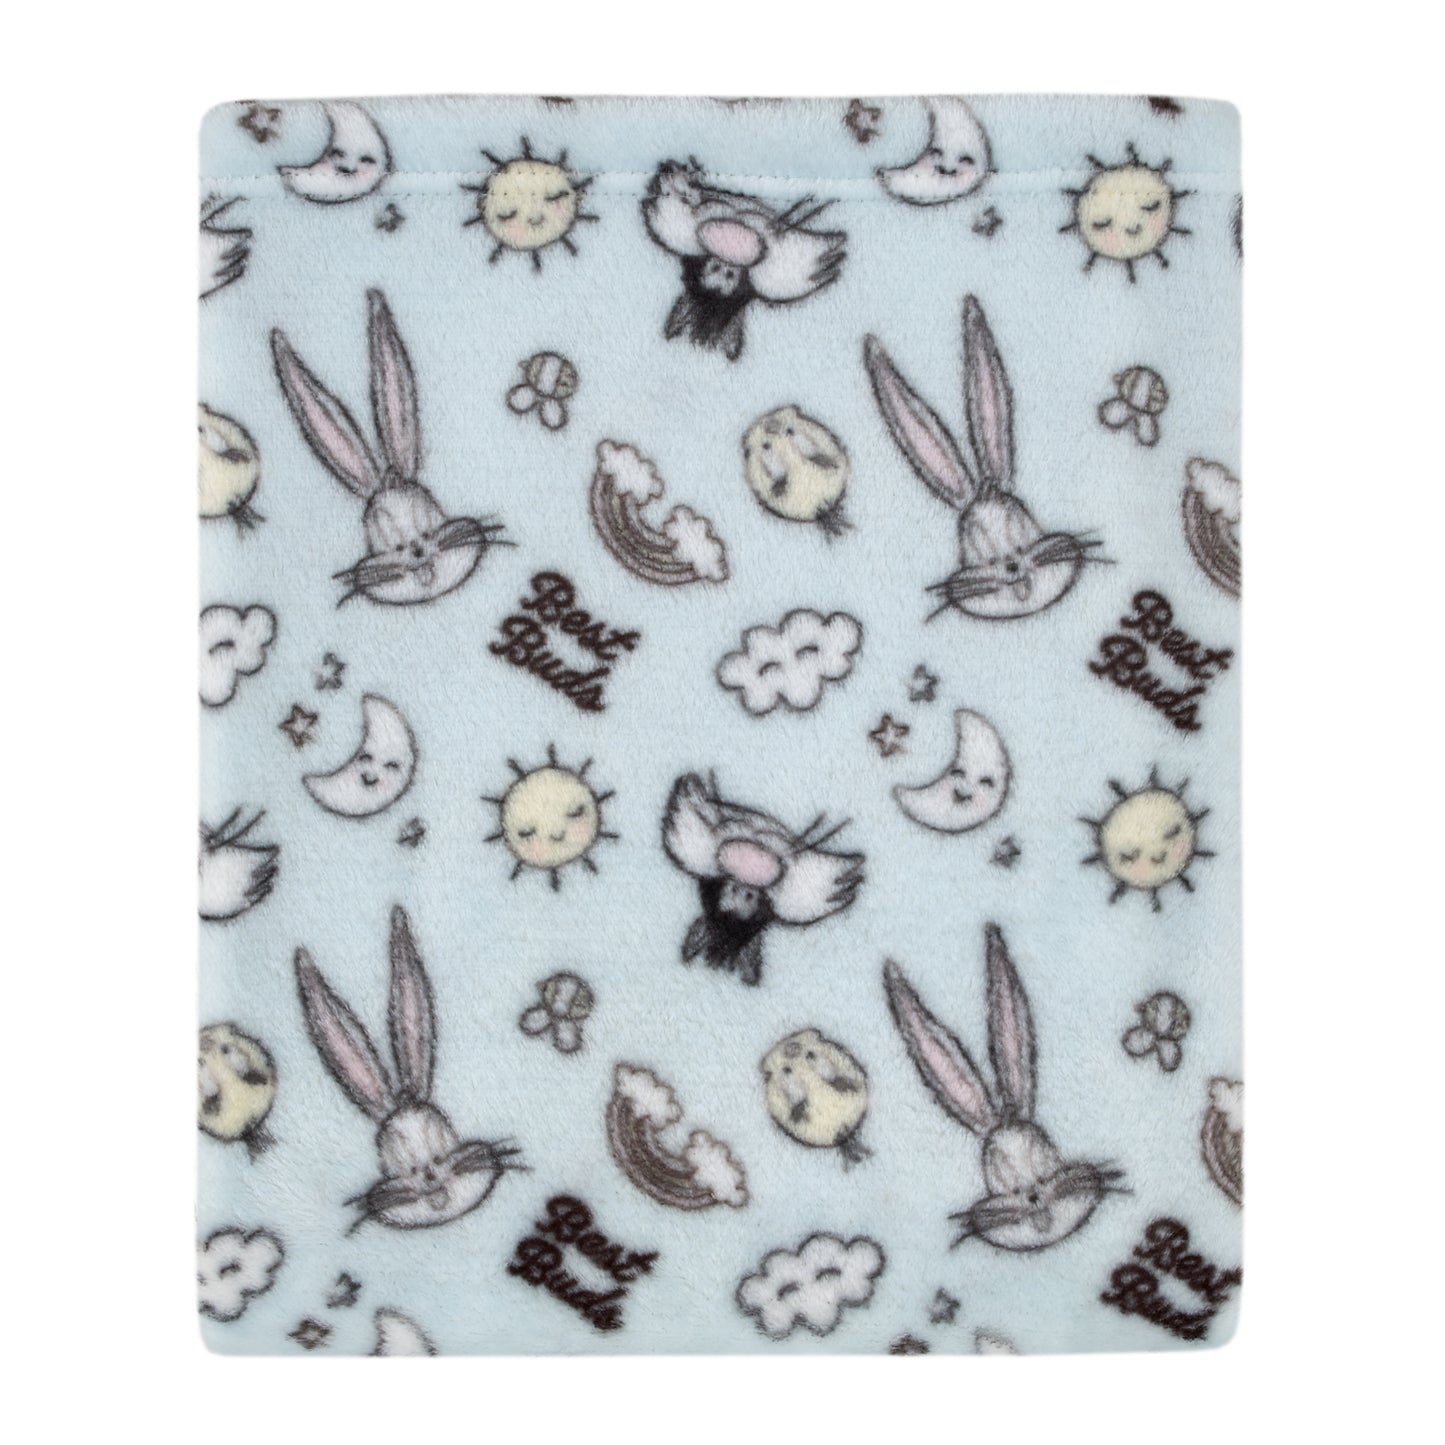 Warner Brothers Looney Tunes Best Buds Pastel Blue, Yellow, and White Bugs Bunny, Tweety, and Sylvester the Cat Super Soft Baby Blanket